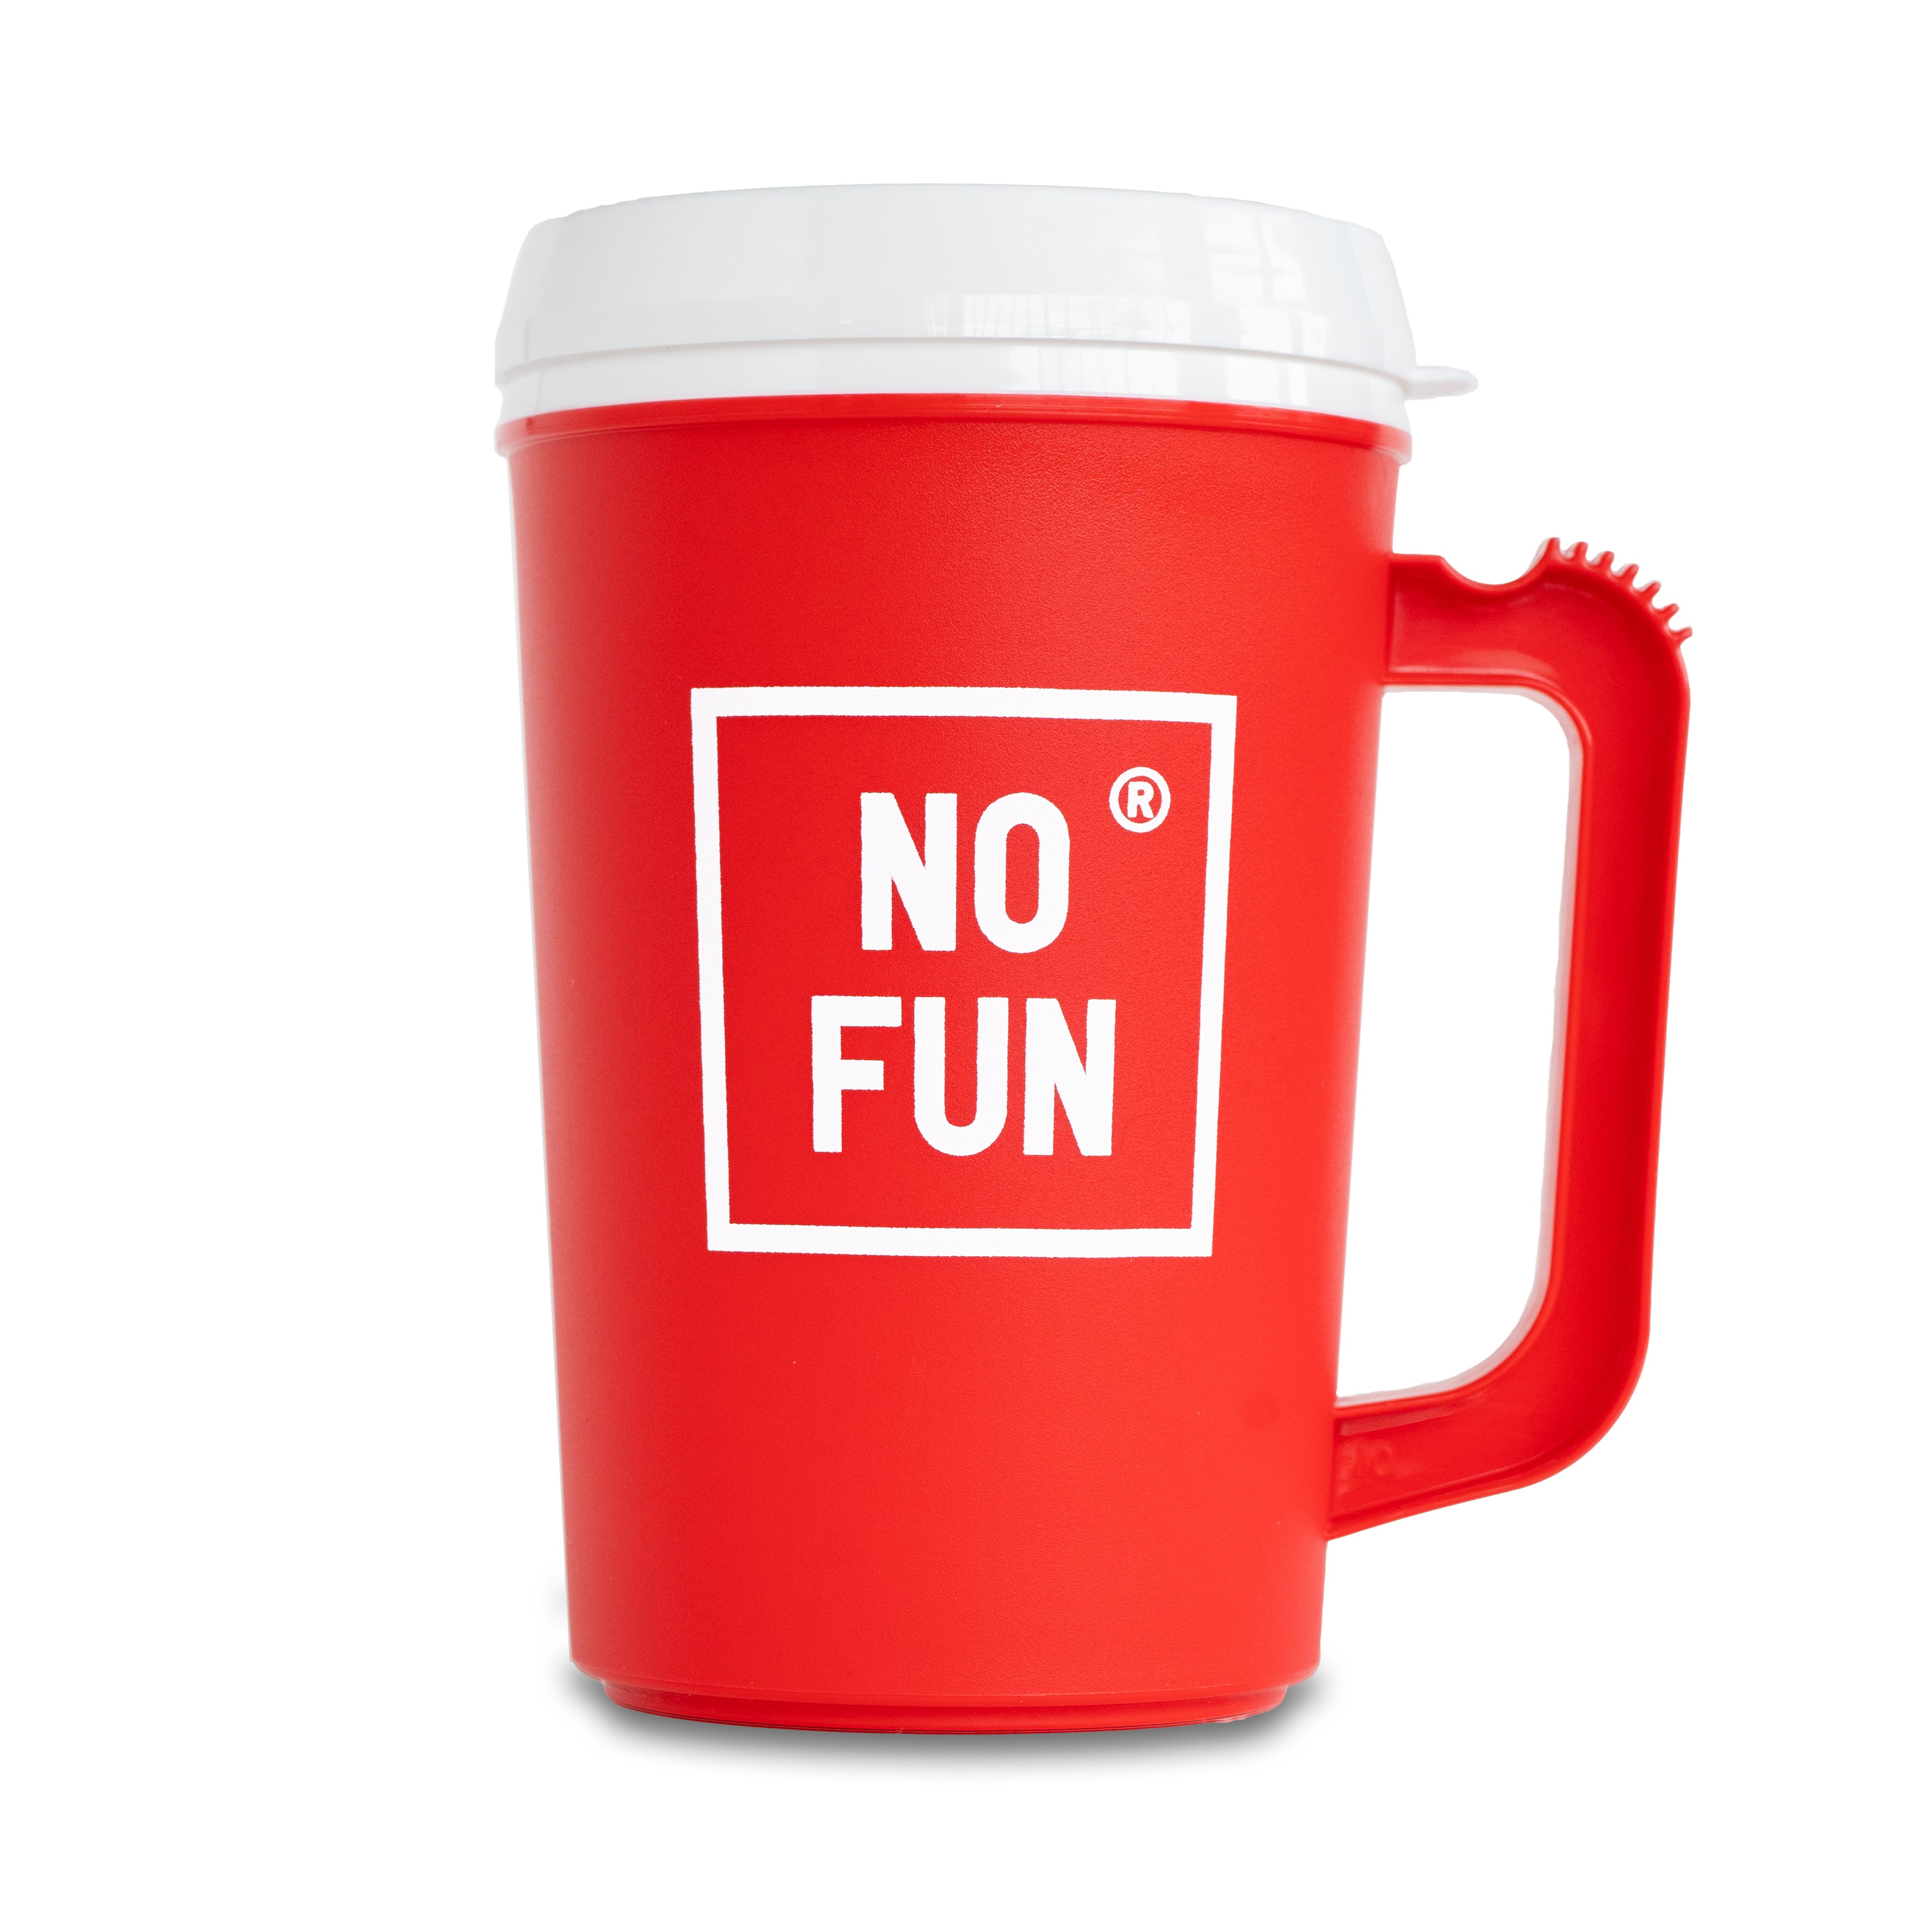 "Big Sipper" Mug in Red by No Fun® against a white background.  Mug has a white lid. There is a square "No Fun®" logo printed in white which is visible.